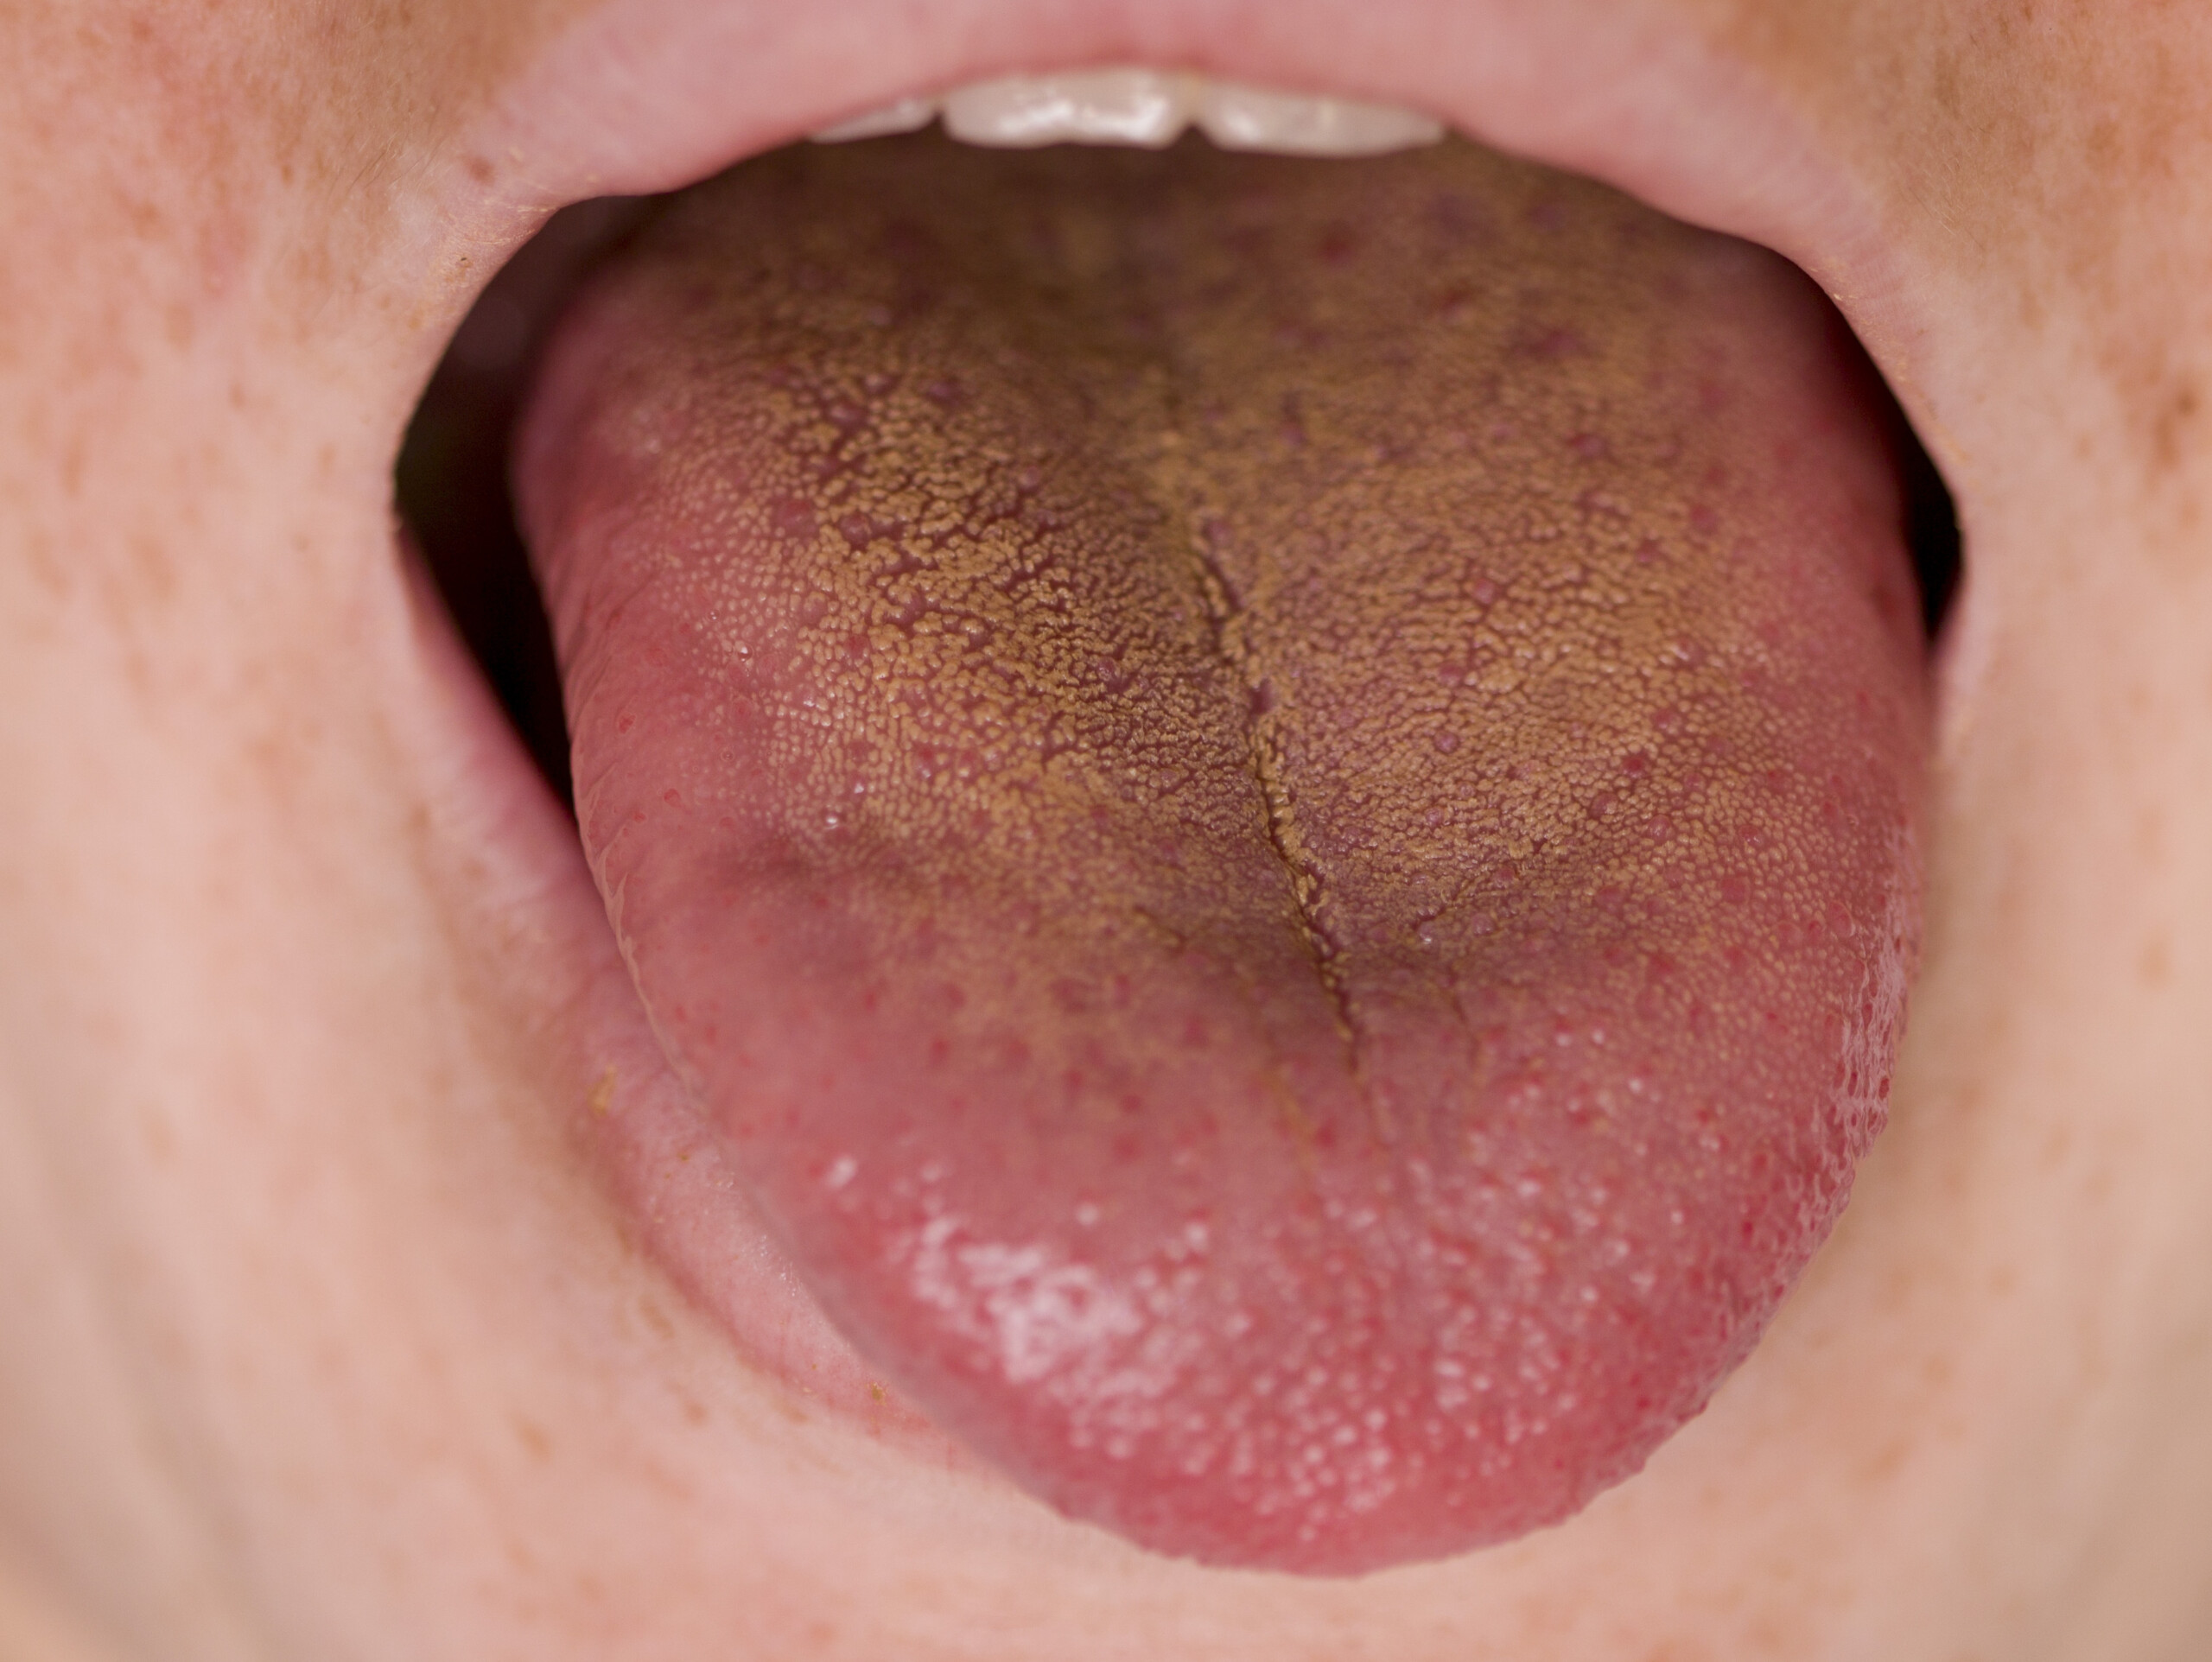 Can Gerd Cause a Yellow Orange Coated Tongue?